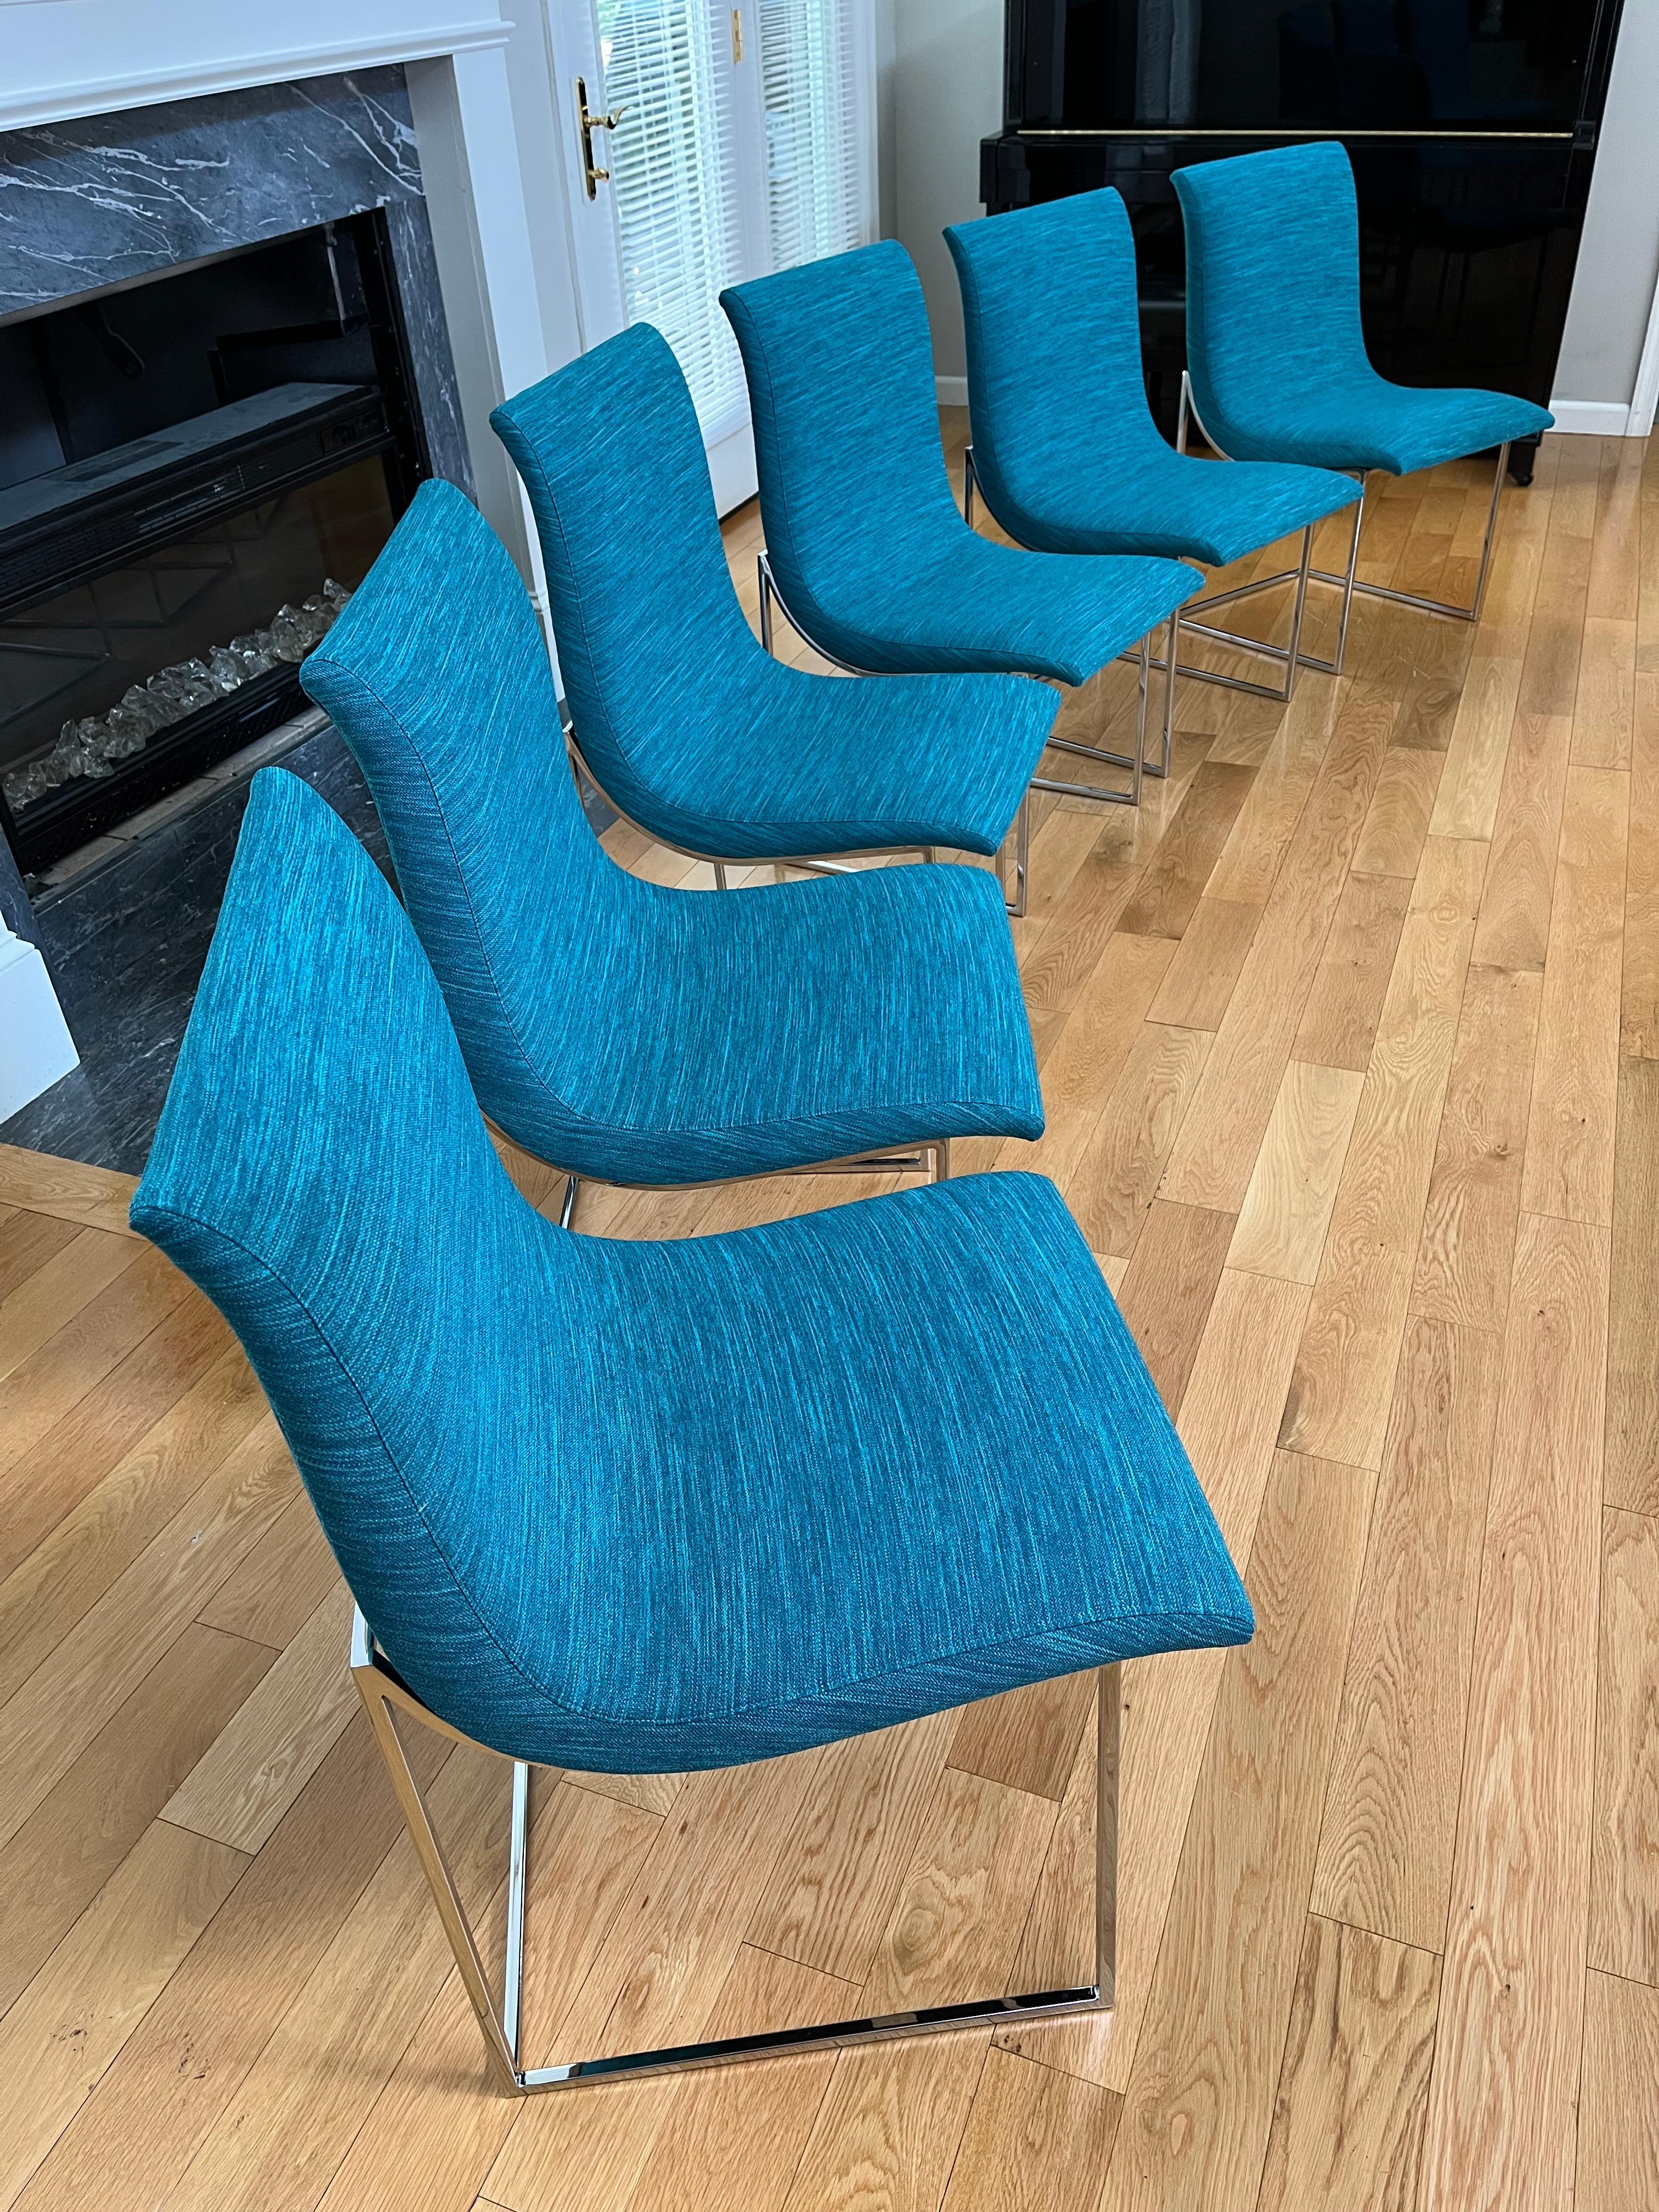 Late 20th Century Scoop Dining Chairs by Milo Baughman for Thayer Coggin in Caribbean 'Aqua' Color For Sale